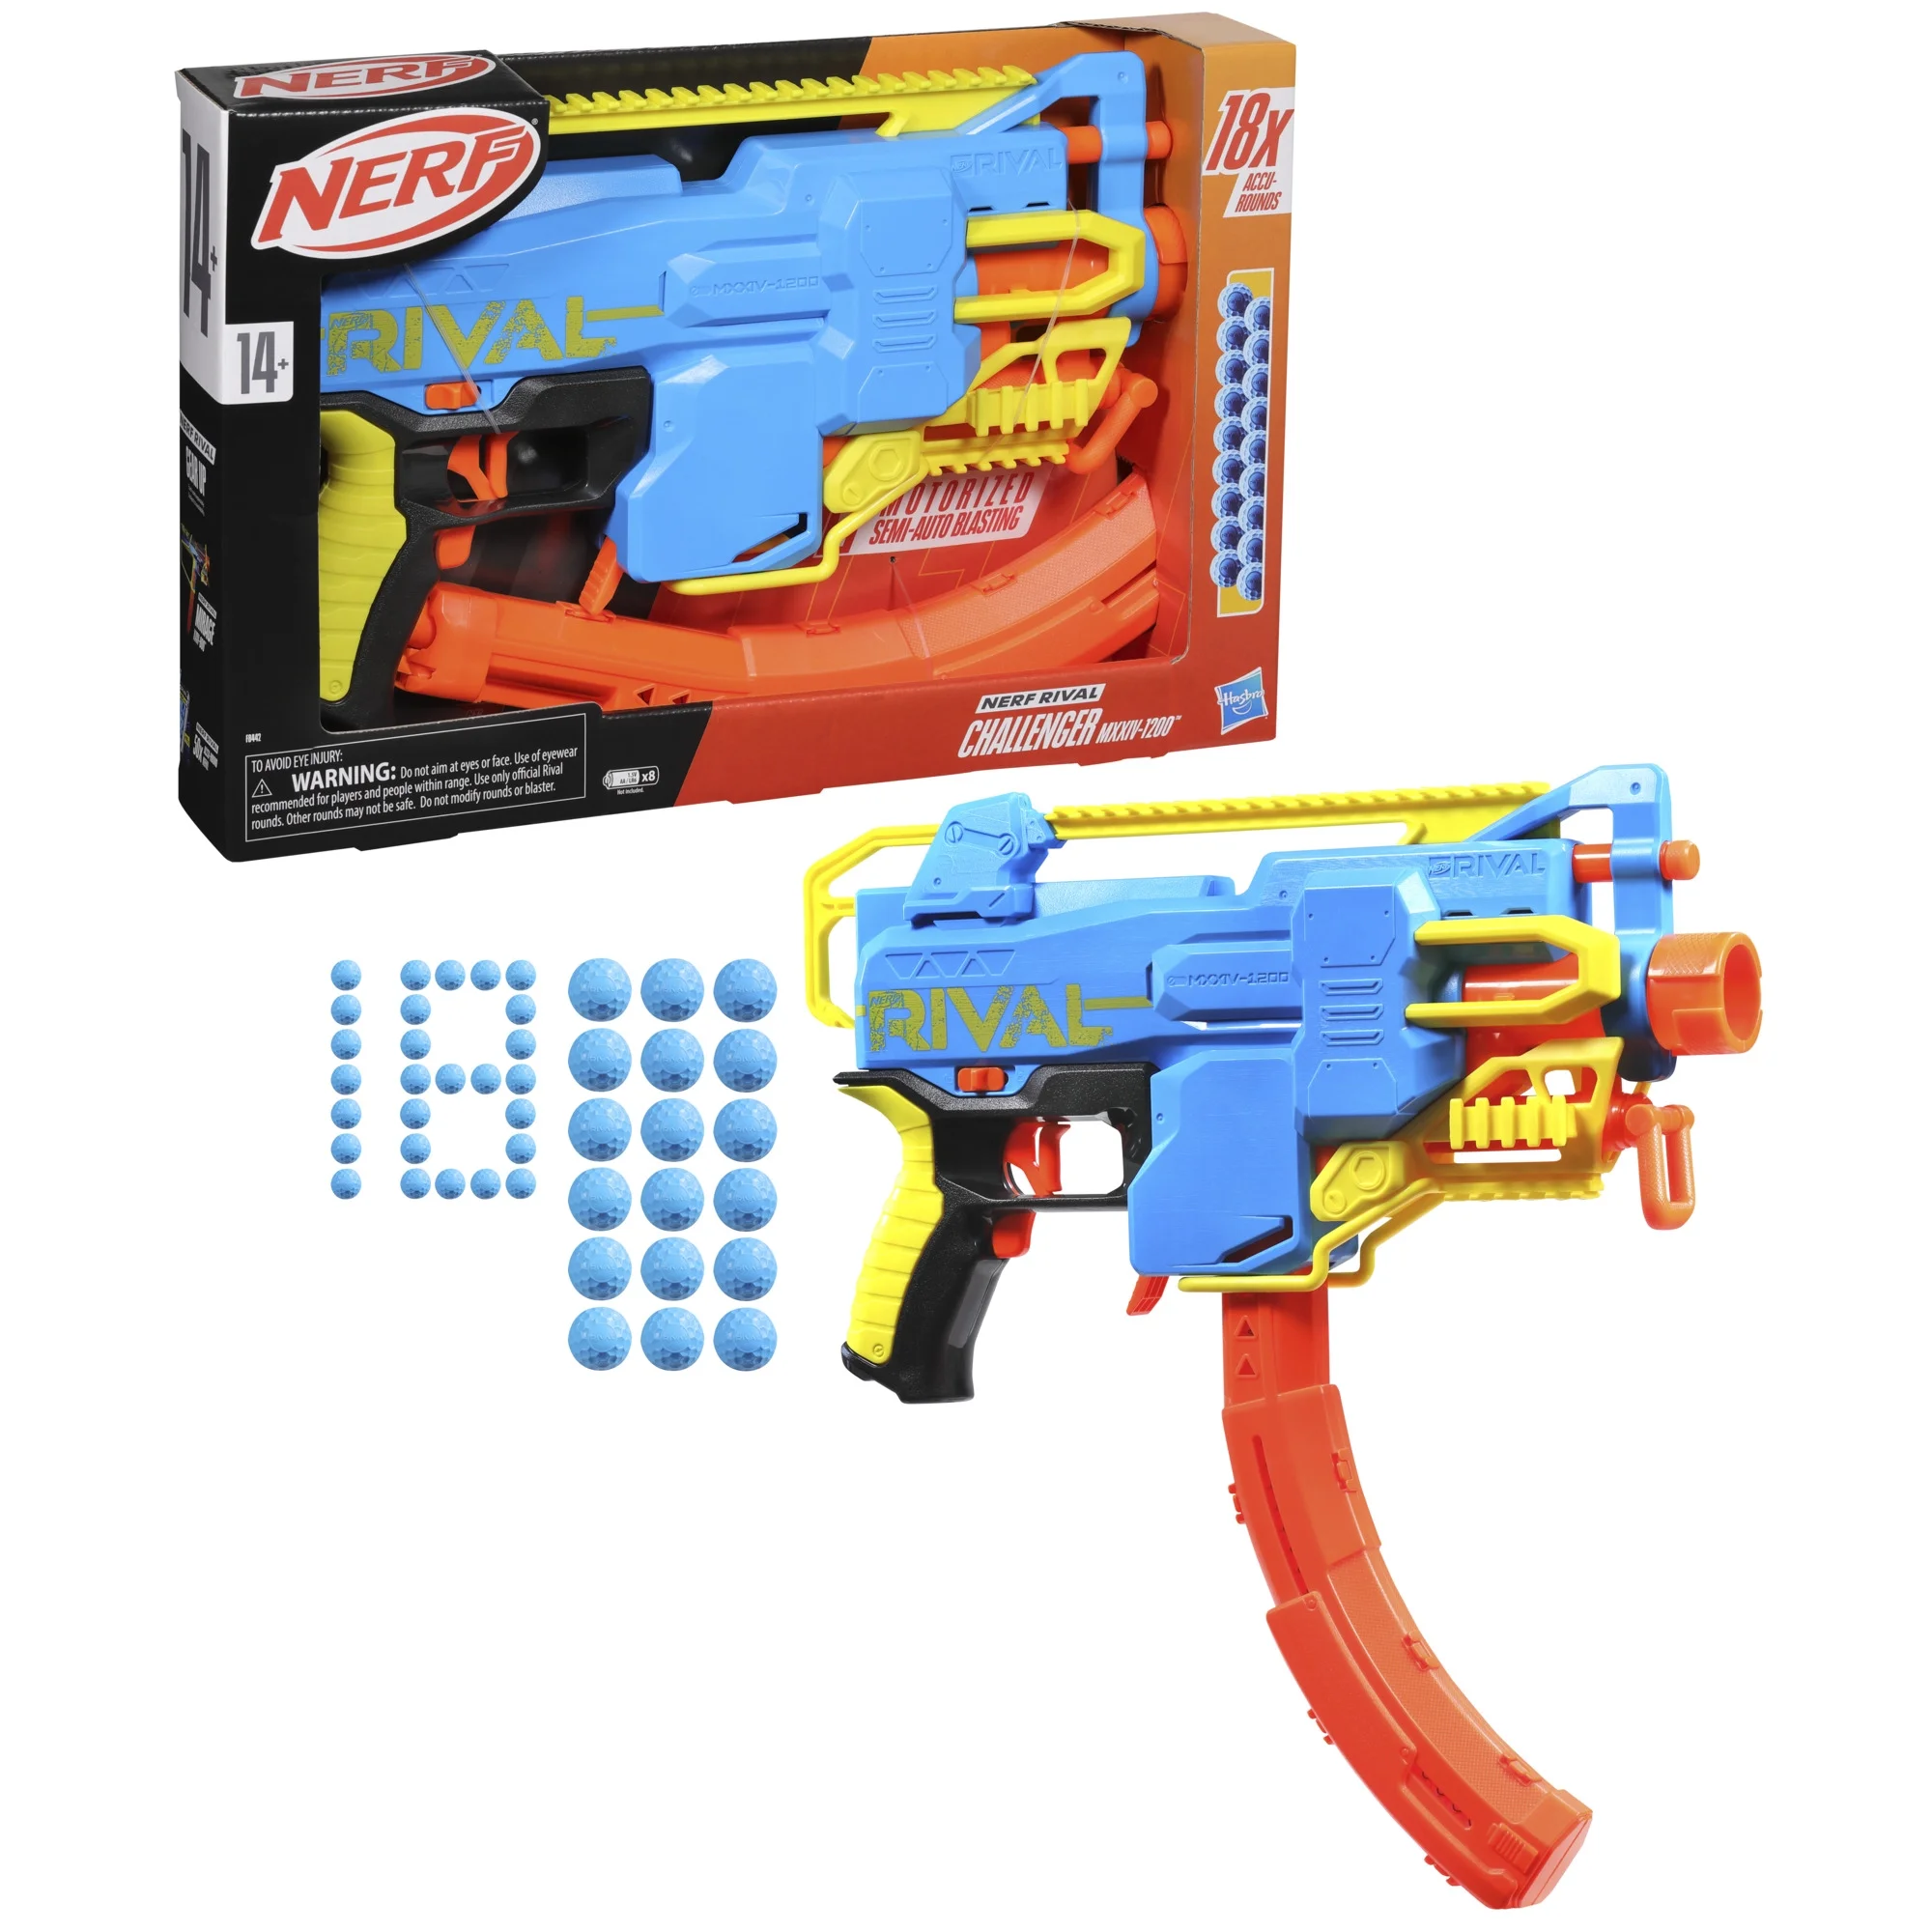 Anybody else have this blaster & if so do they have the CD-Rom??! The game  was called Nerf Jr. Foam Blaster: Attack of the Kleptons! : r/Nerf